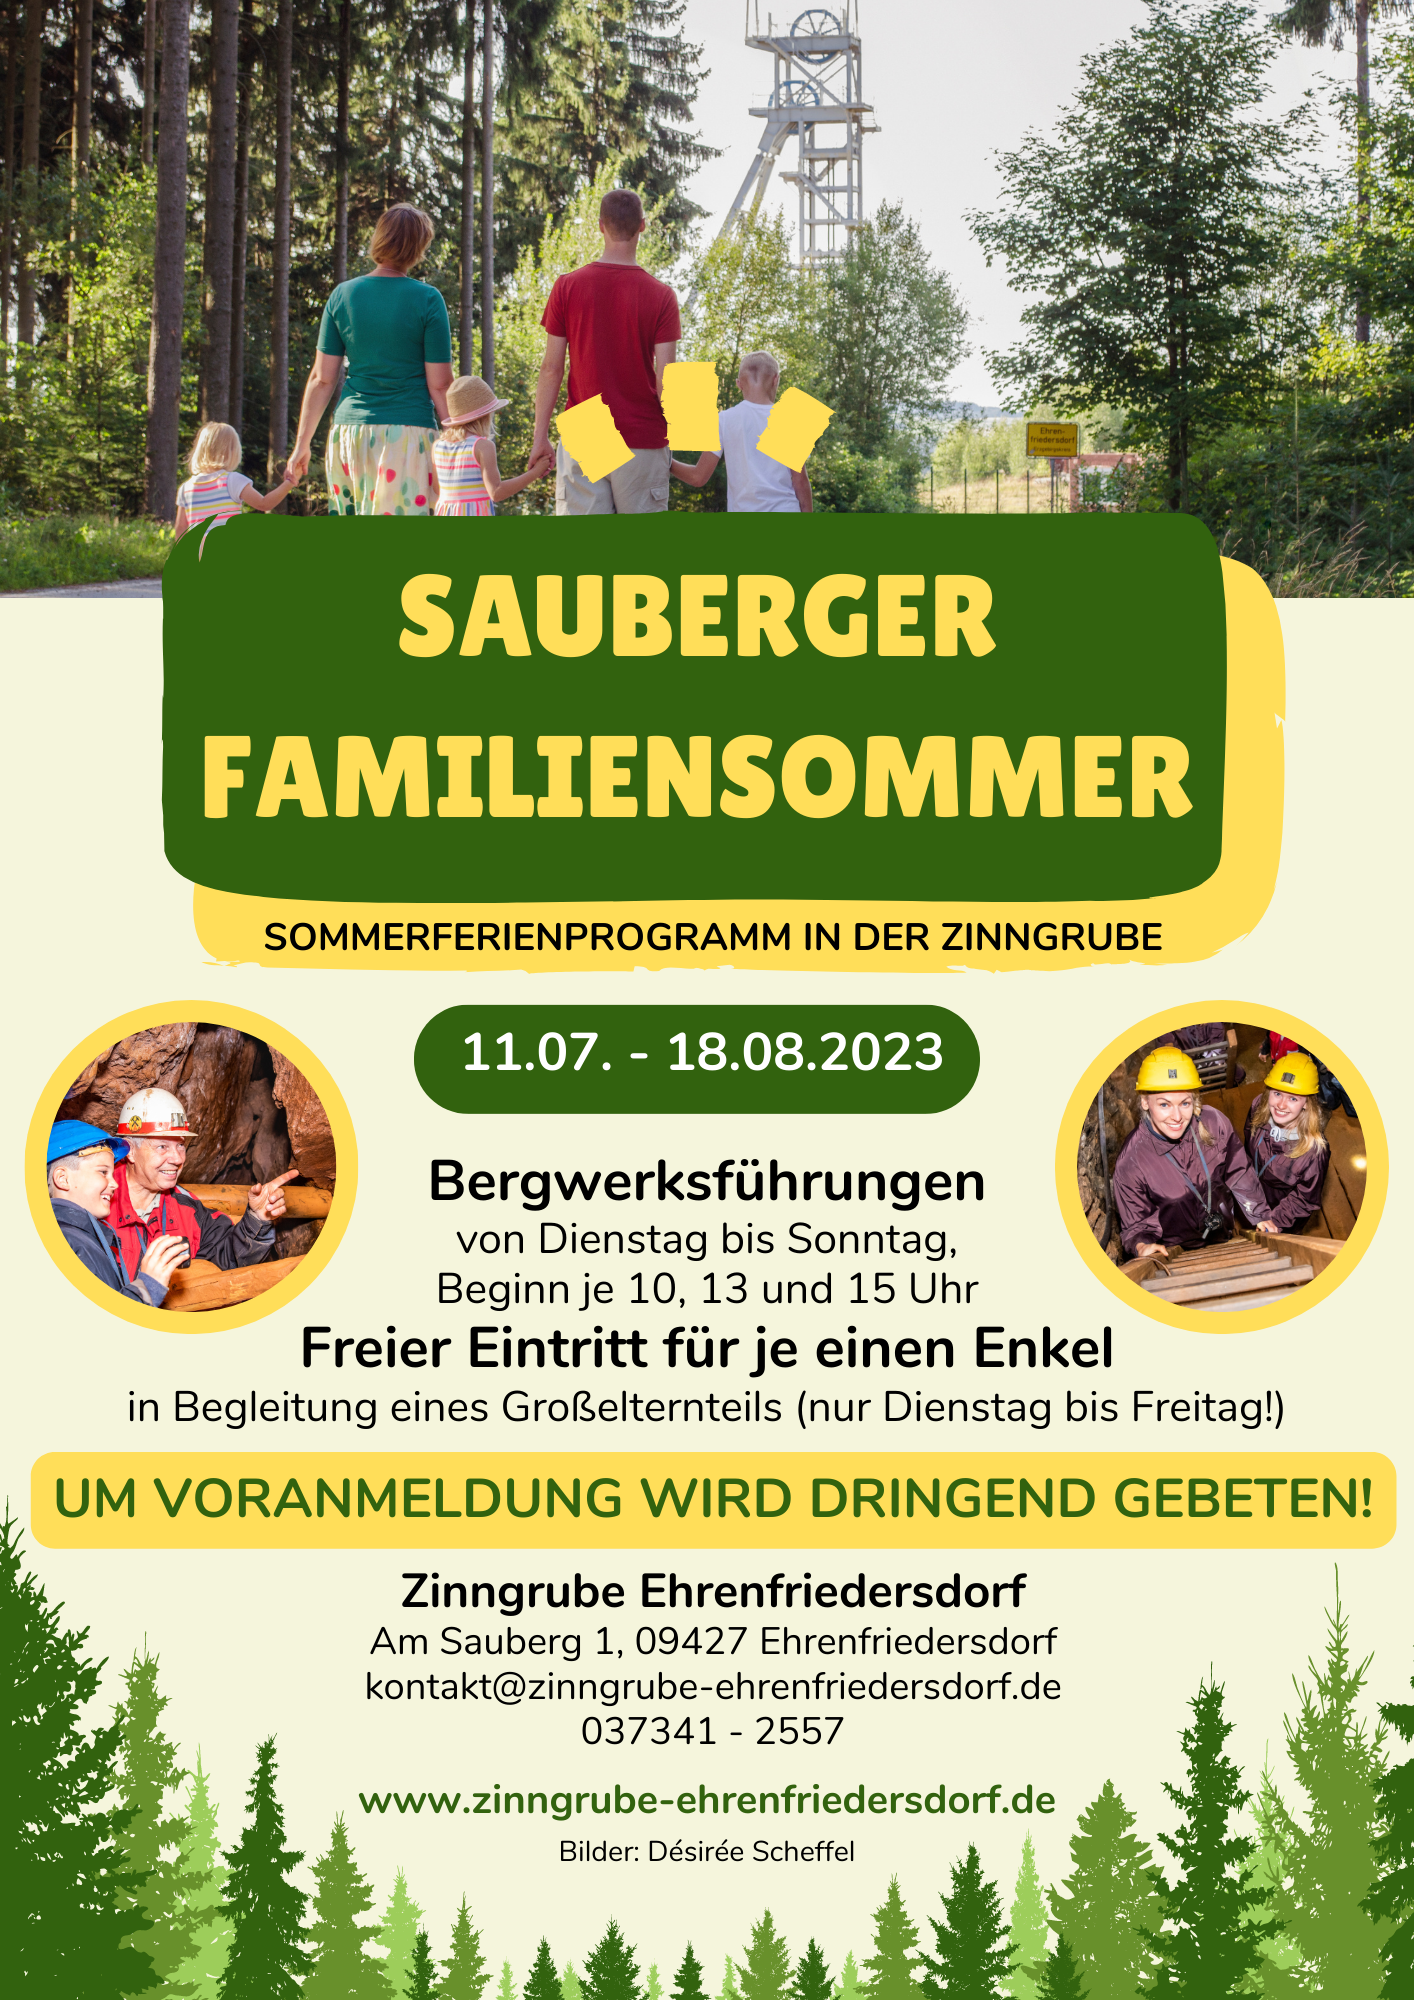 Sauberger Familiensommer A4